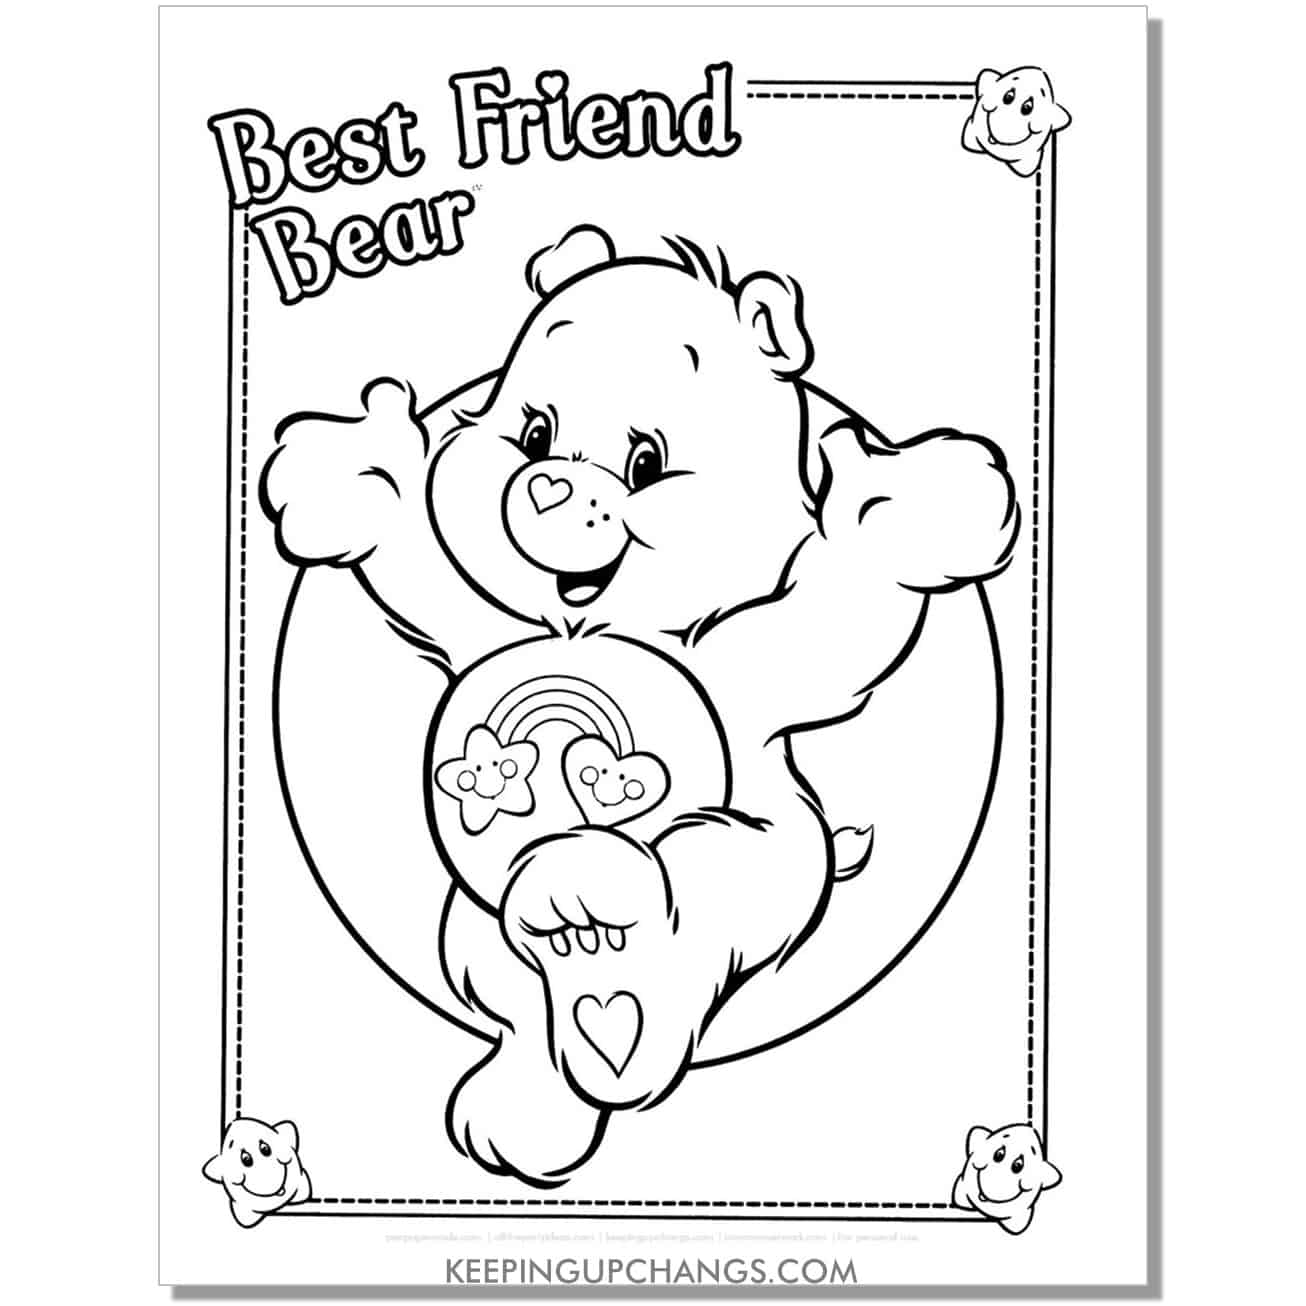 best friend care bear coloring page.